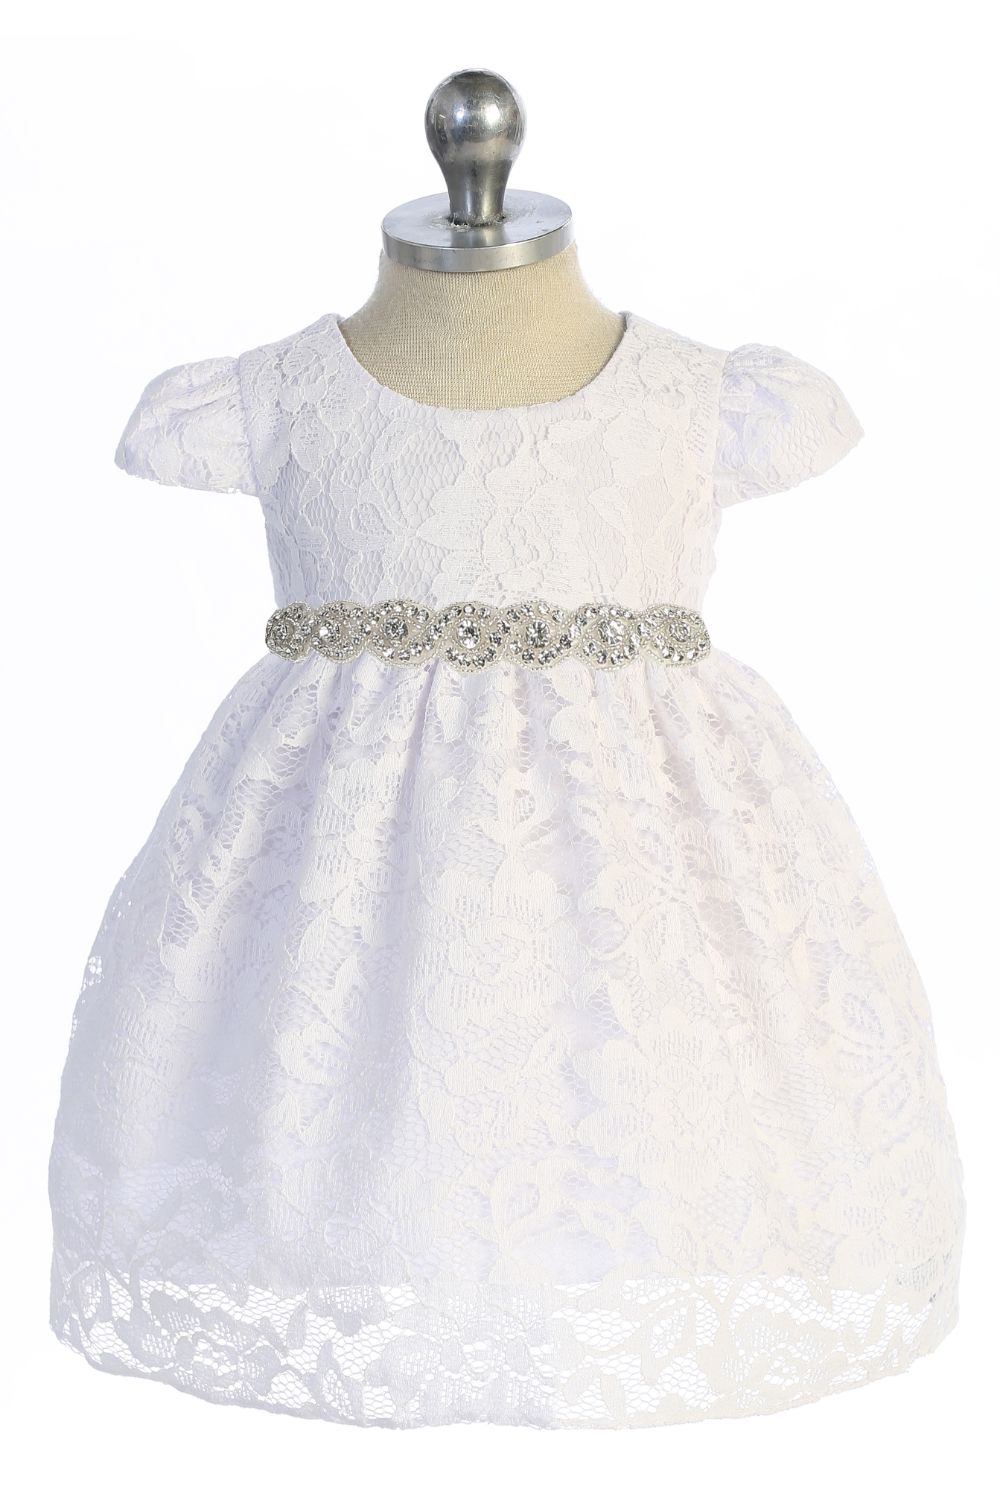 532-A All Lace Baby Dress with V Back & Bow and Rhinestone Trim